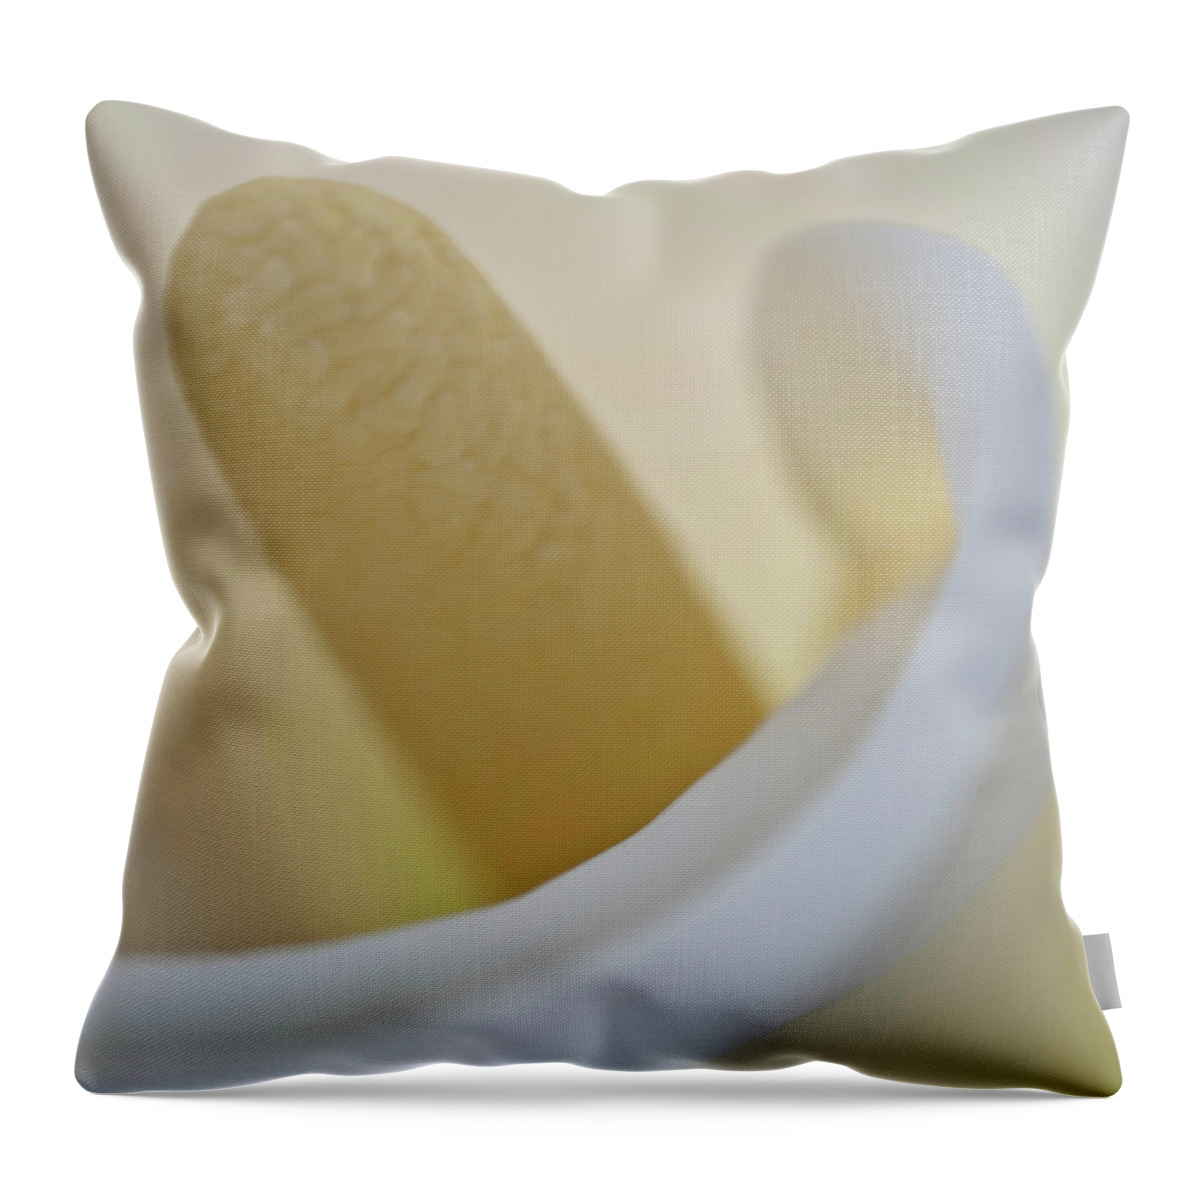 Abstract Throw Pillow featuring the photograph Calla Details 8 by Heiko Koehrer-Wagner